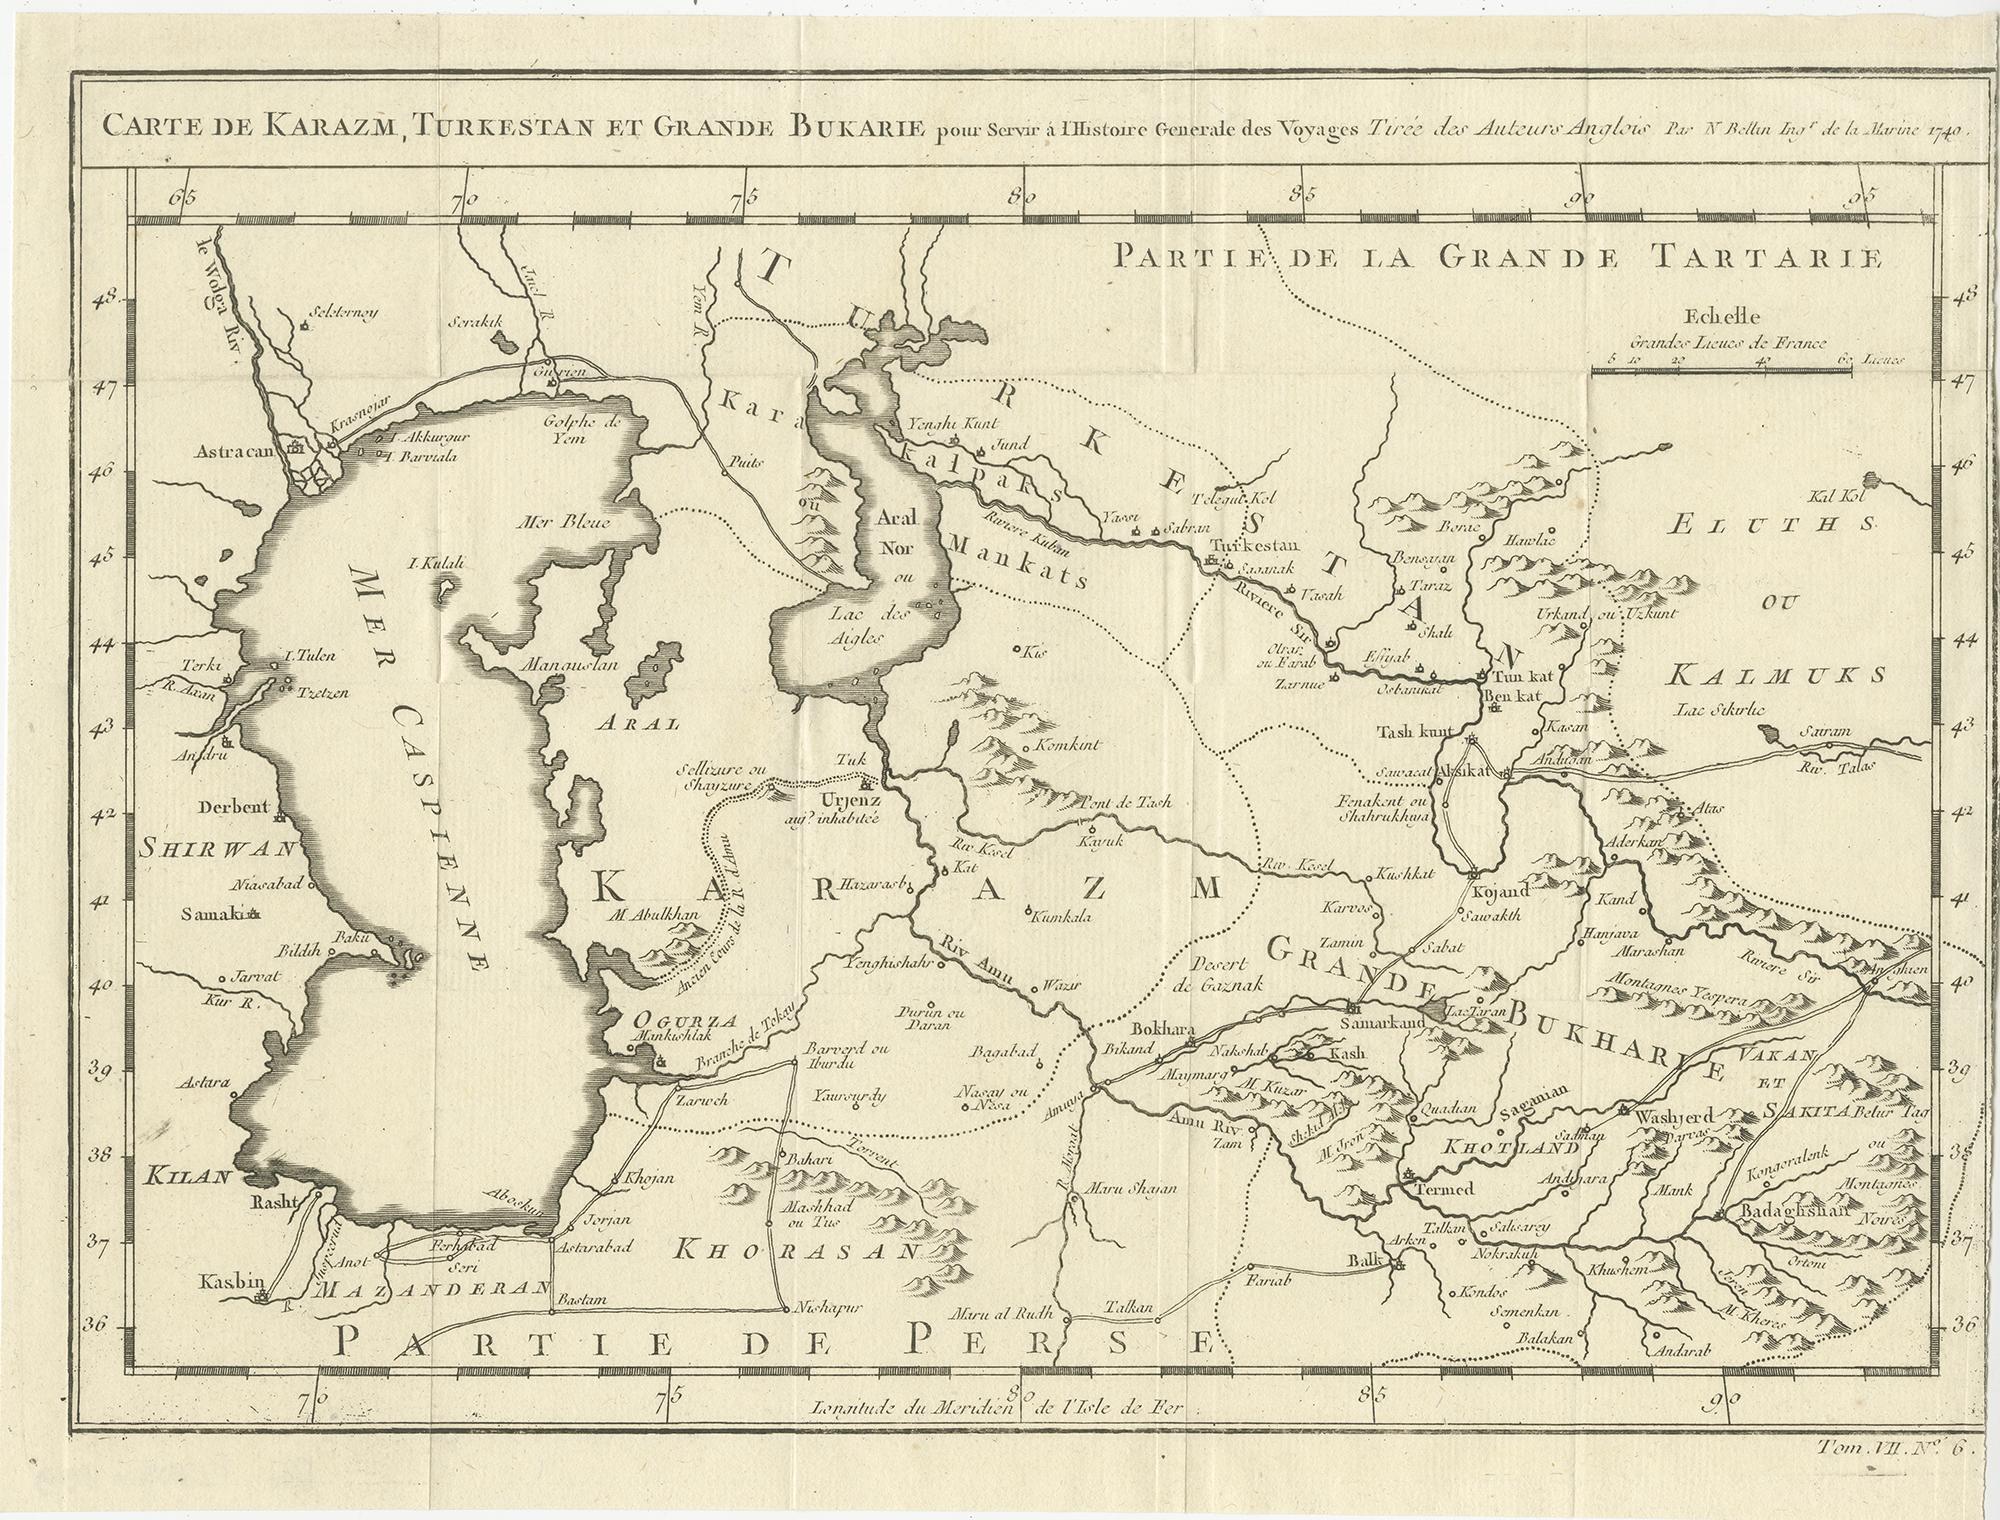 Antique map titled 'Carte de Karazm, Turkestan et Grande Bukarie'. Engraved map centered on Turkestan. Extends to include the Black and Caspian Seas, Uzbekistan, Tajikistan, Turkmenistan, and the northern reaches of Iran and Afghanistan. By Jacques